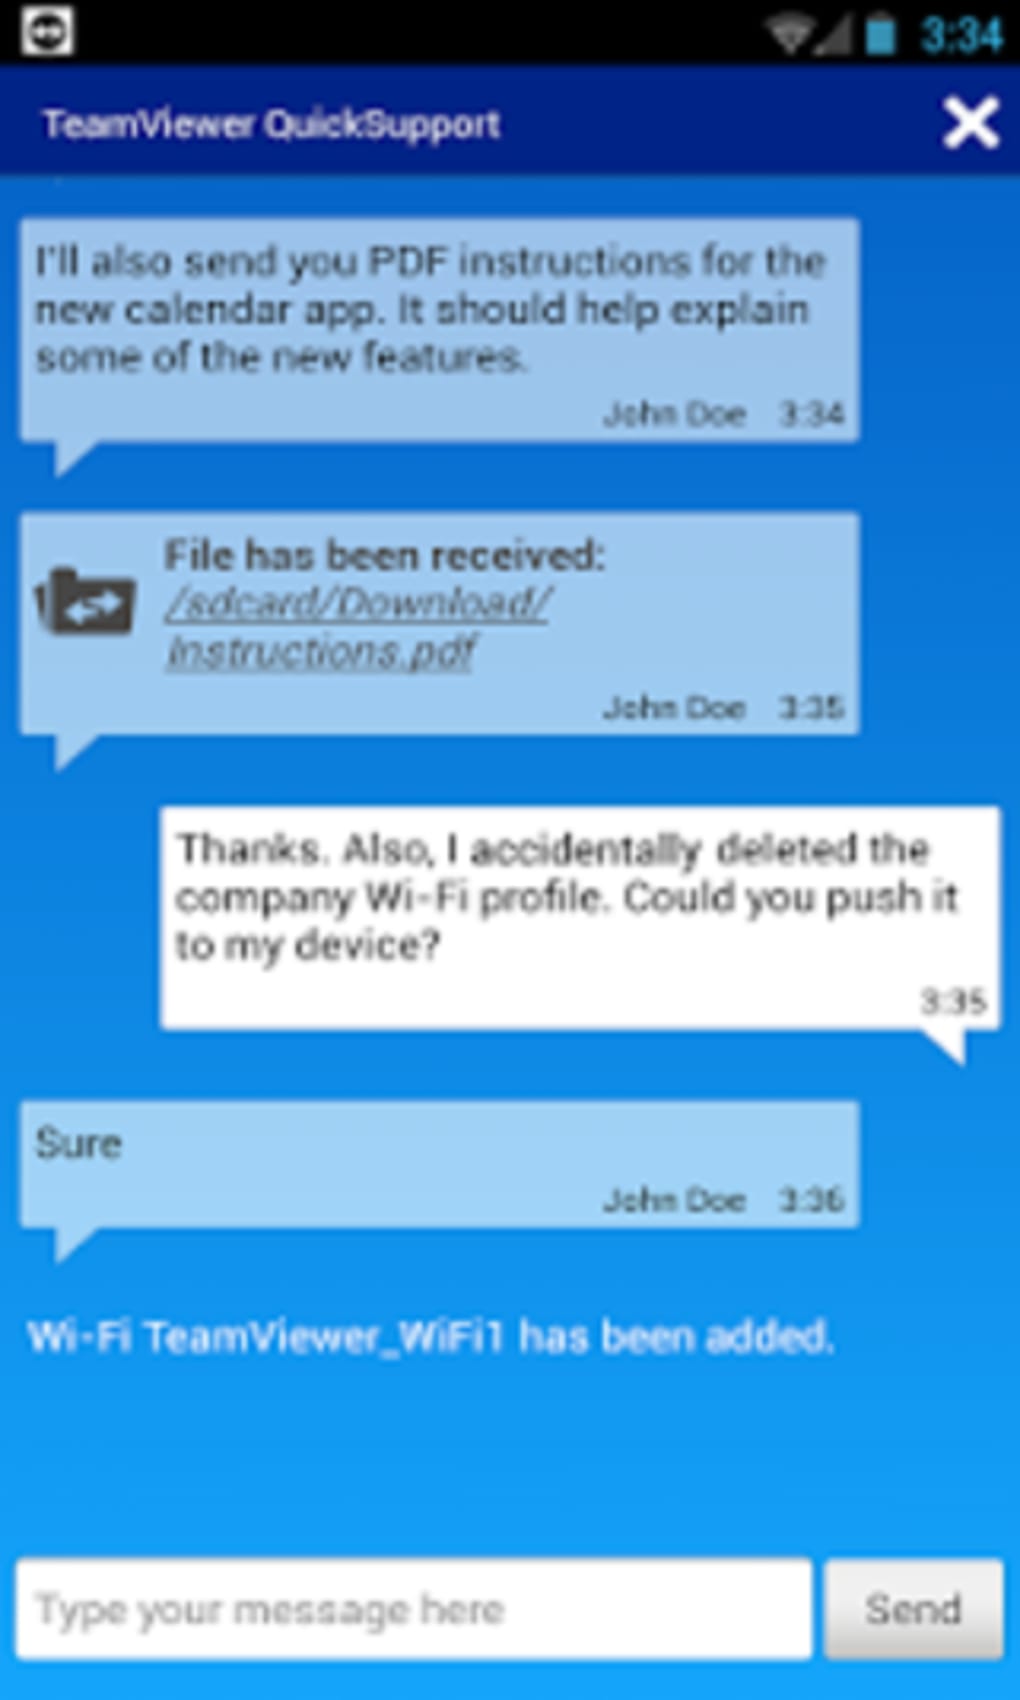 teamviewer quick support ios